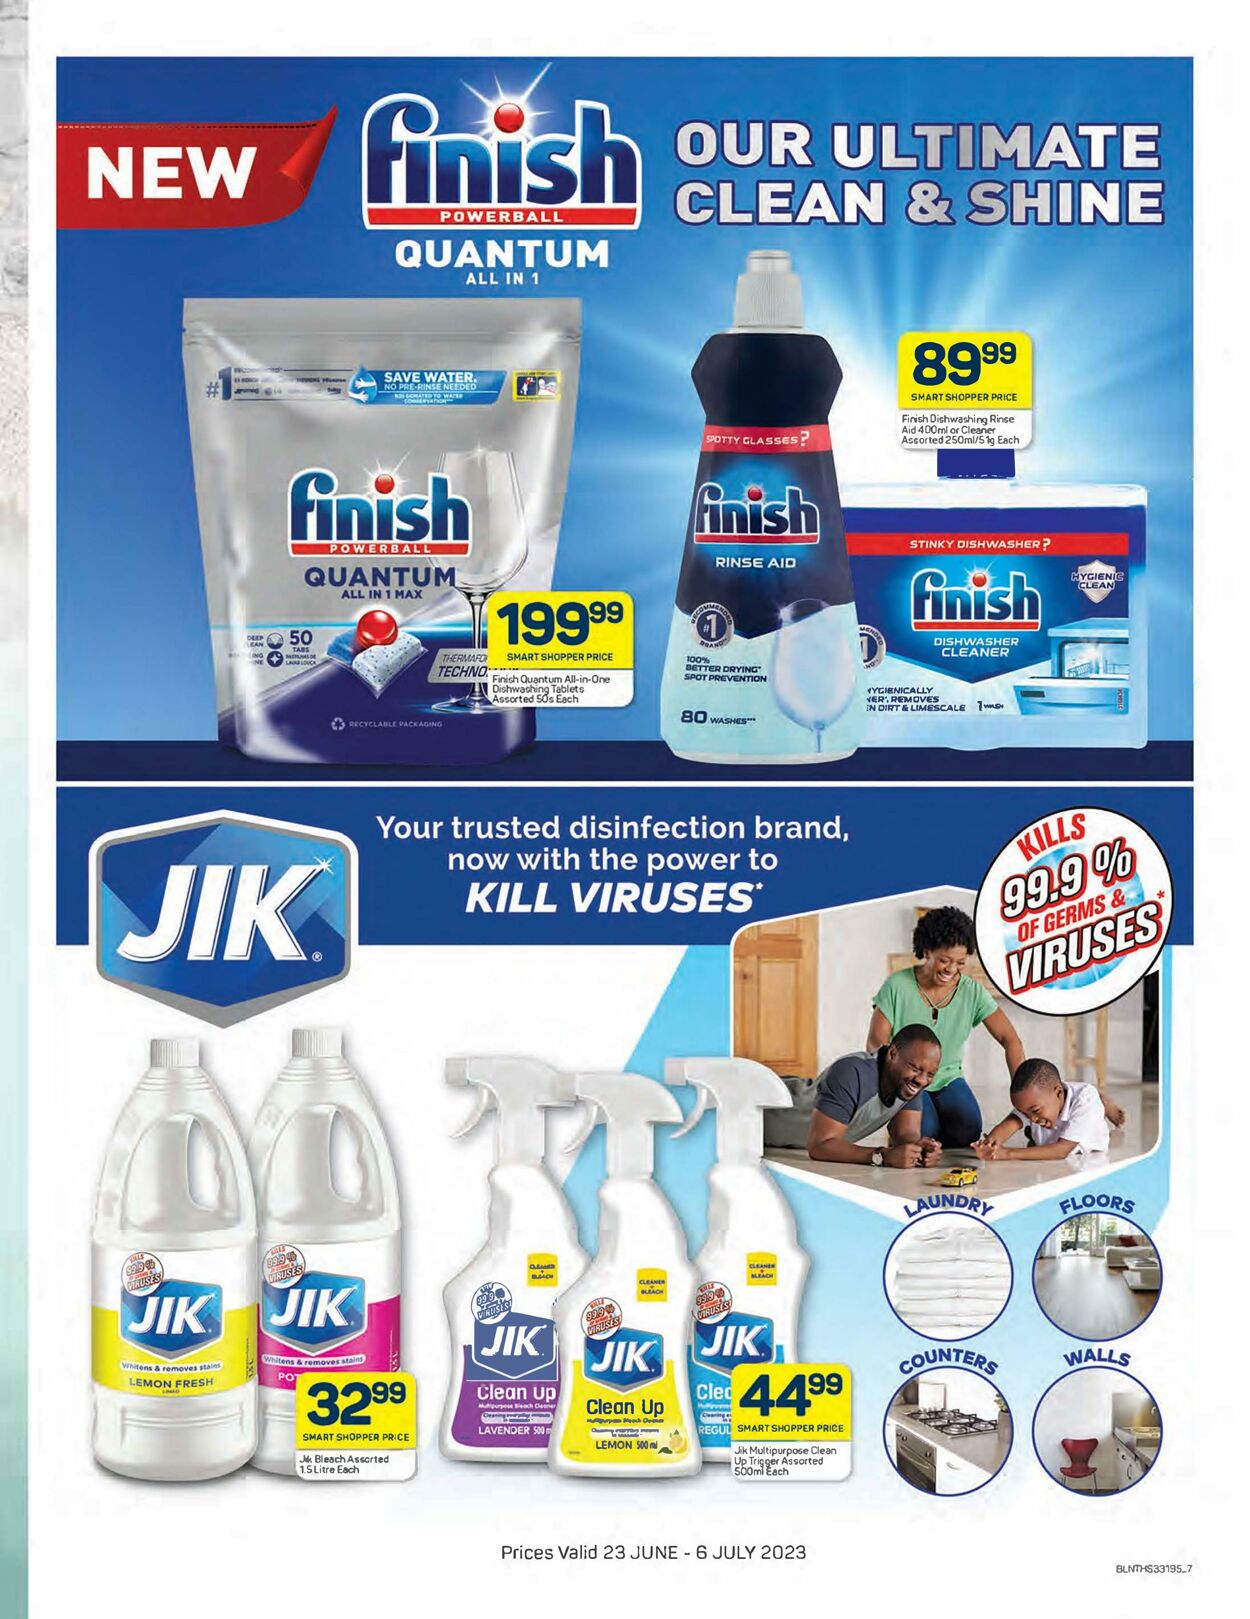 Special Pick n Pay 23.06.2023 - 06.07.2023